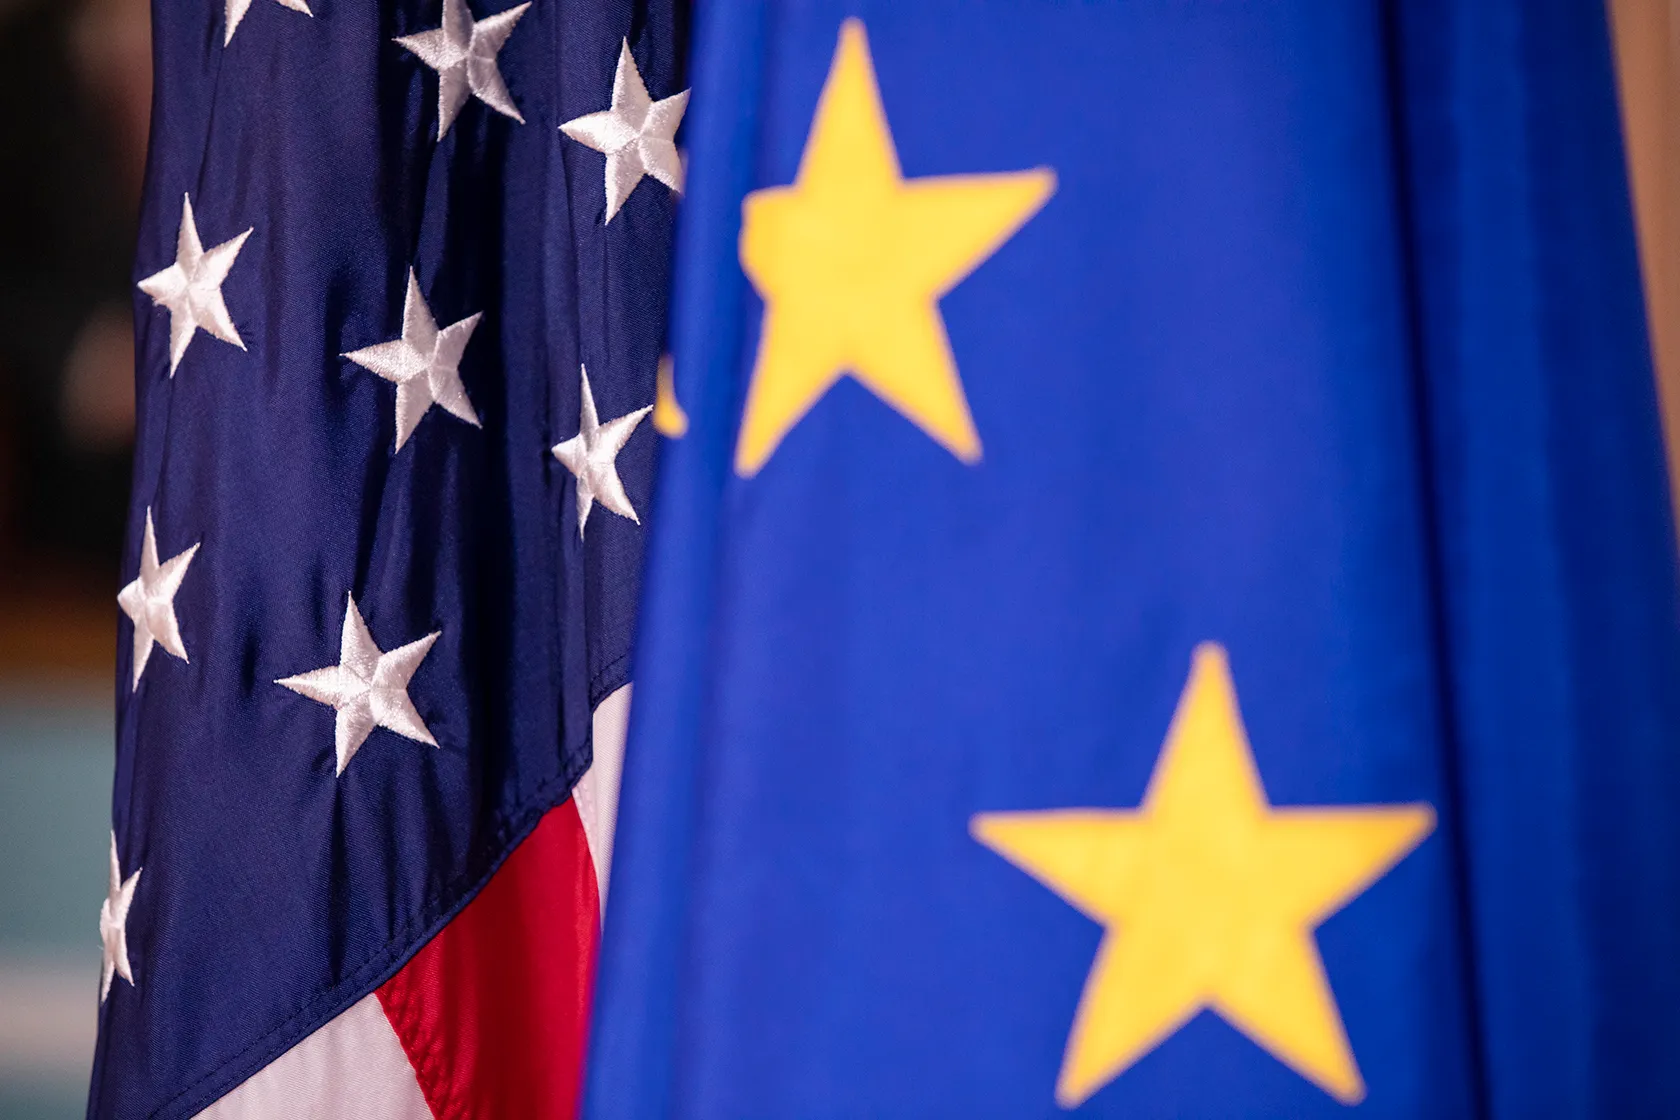 Close-up on EU and U.S. flags standing side by side